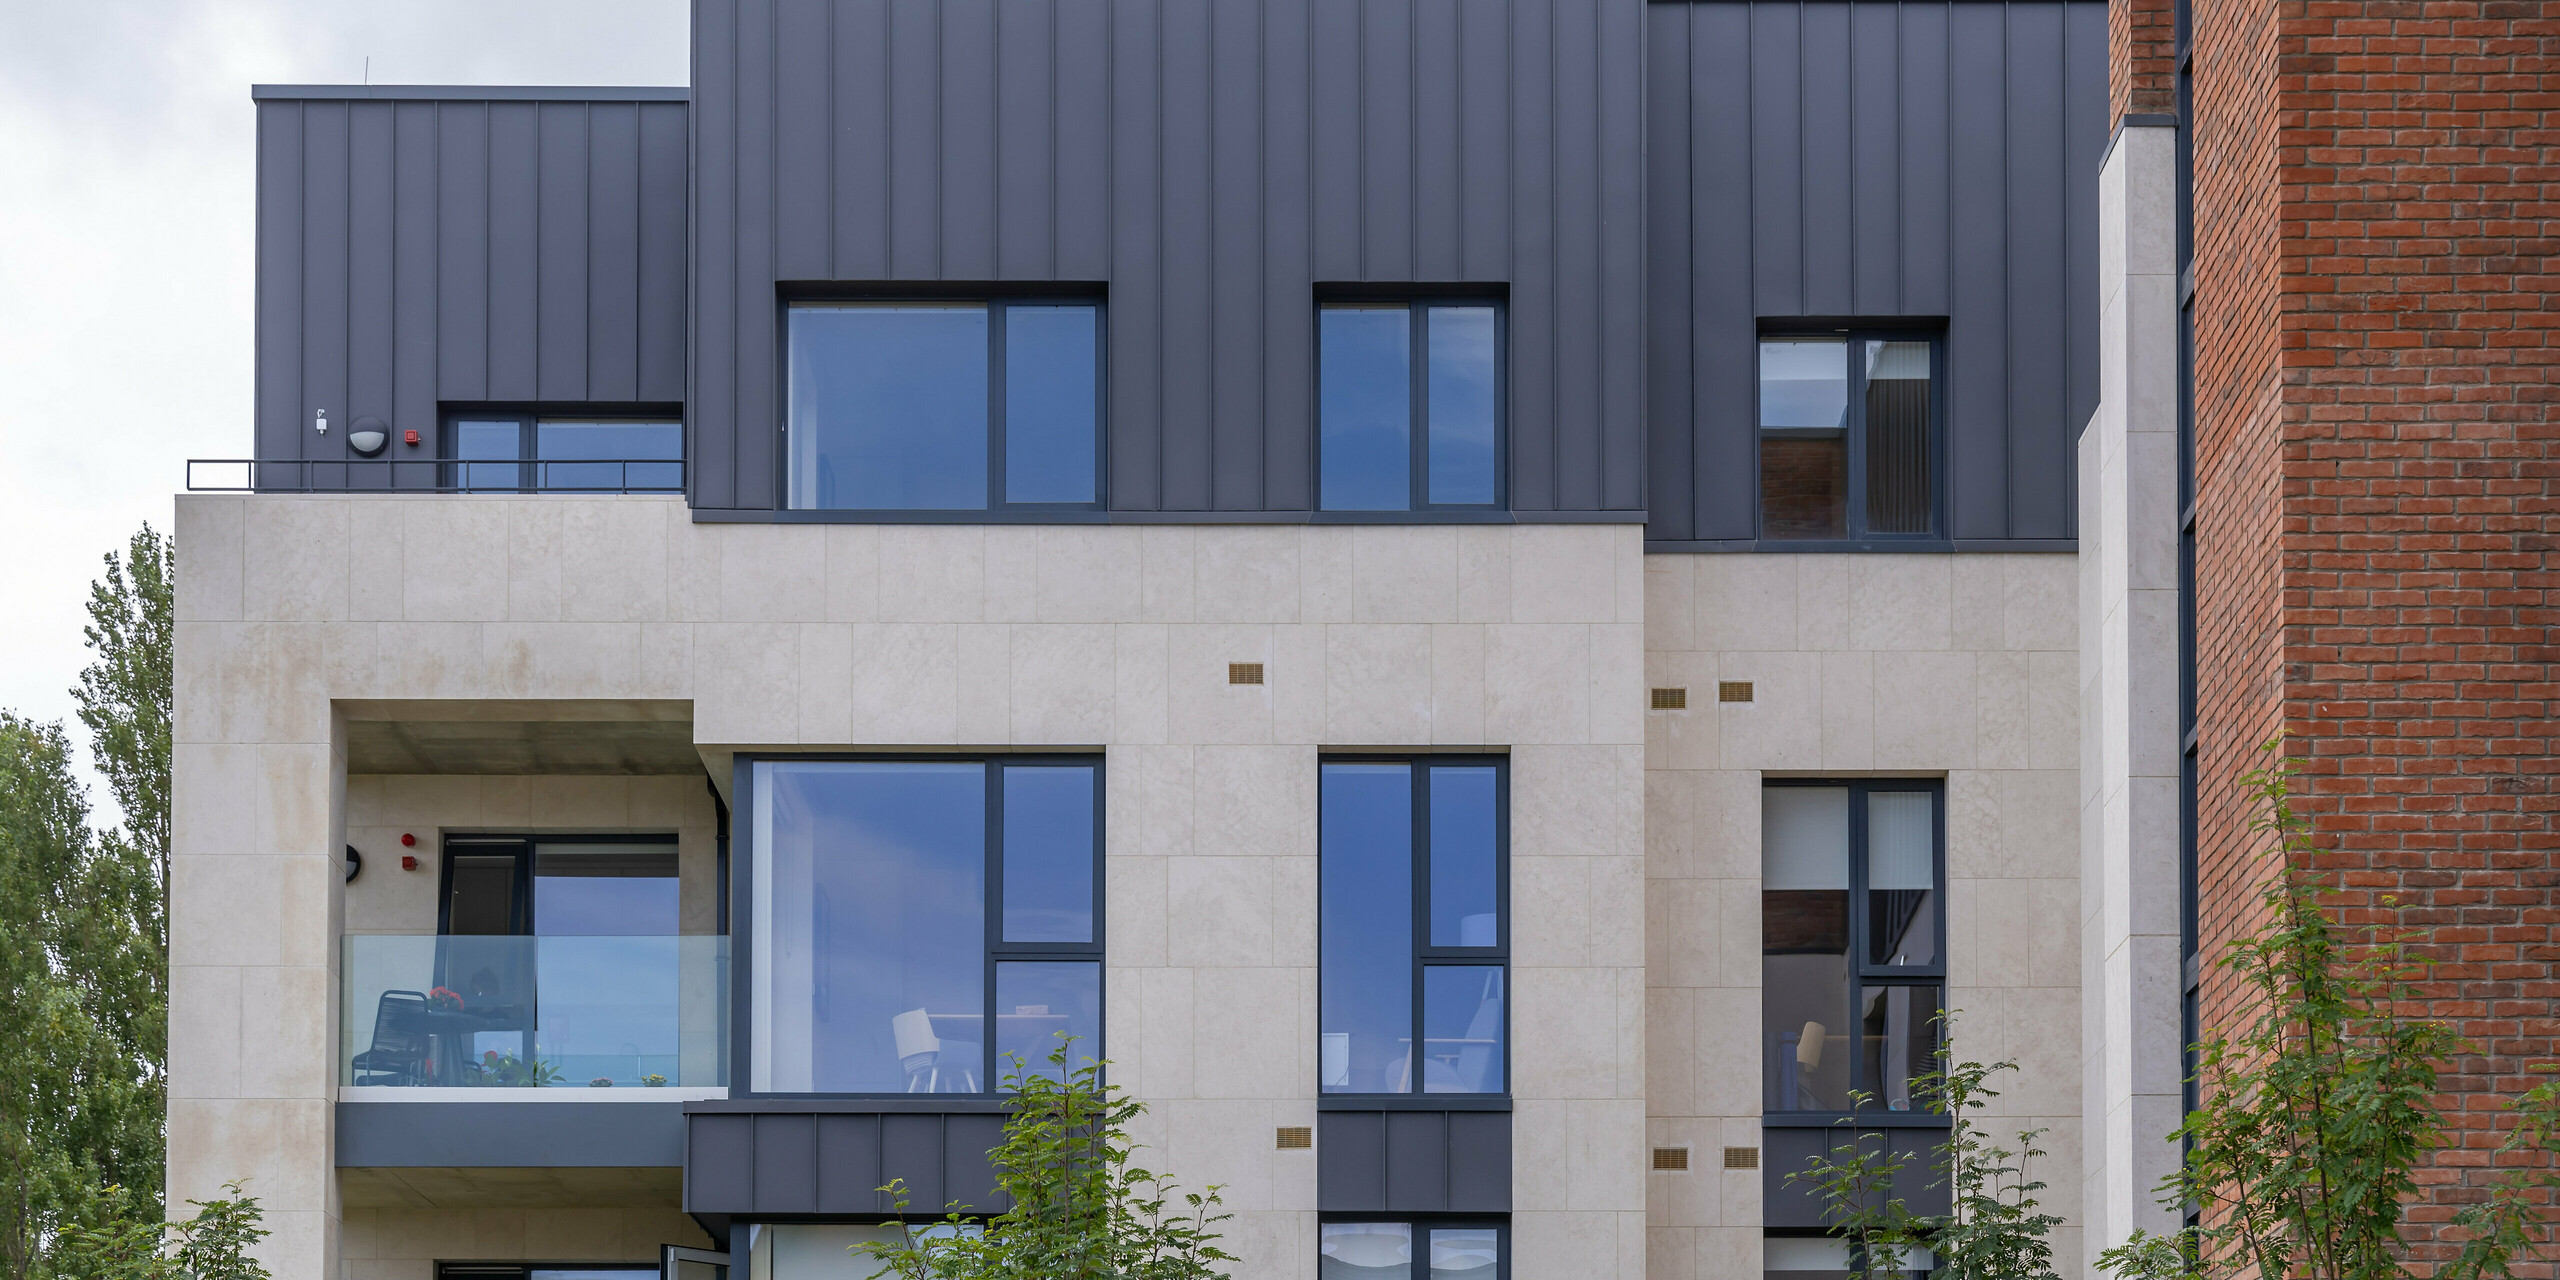 The residential complex of Oatlands Manor in the south of Dublin is wrapped in PREFALZ in the colour of P.10 Dark Grey on the façade